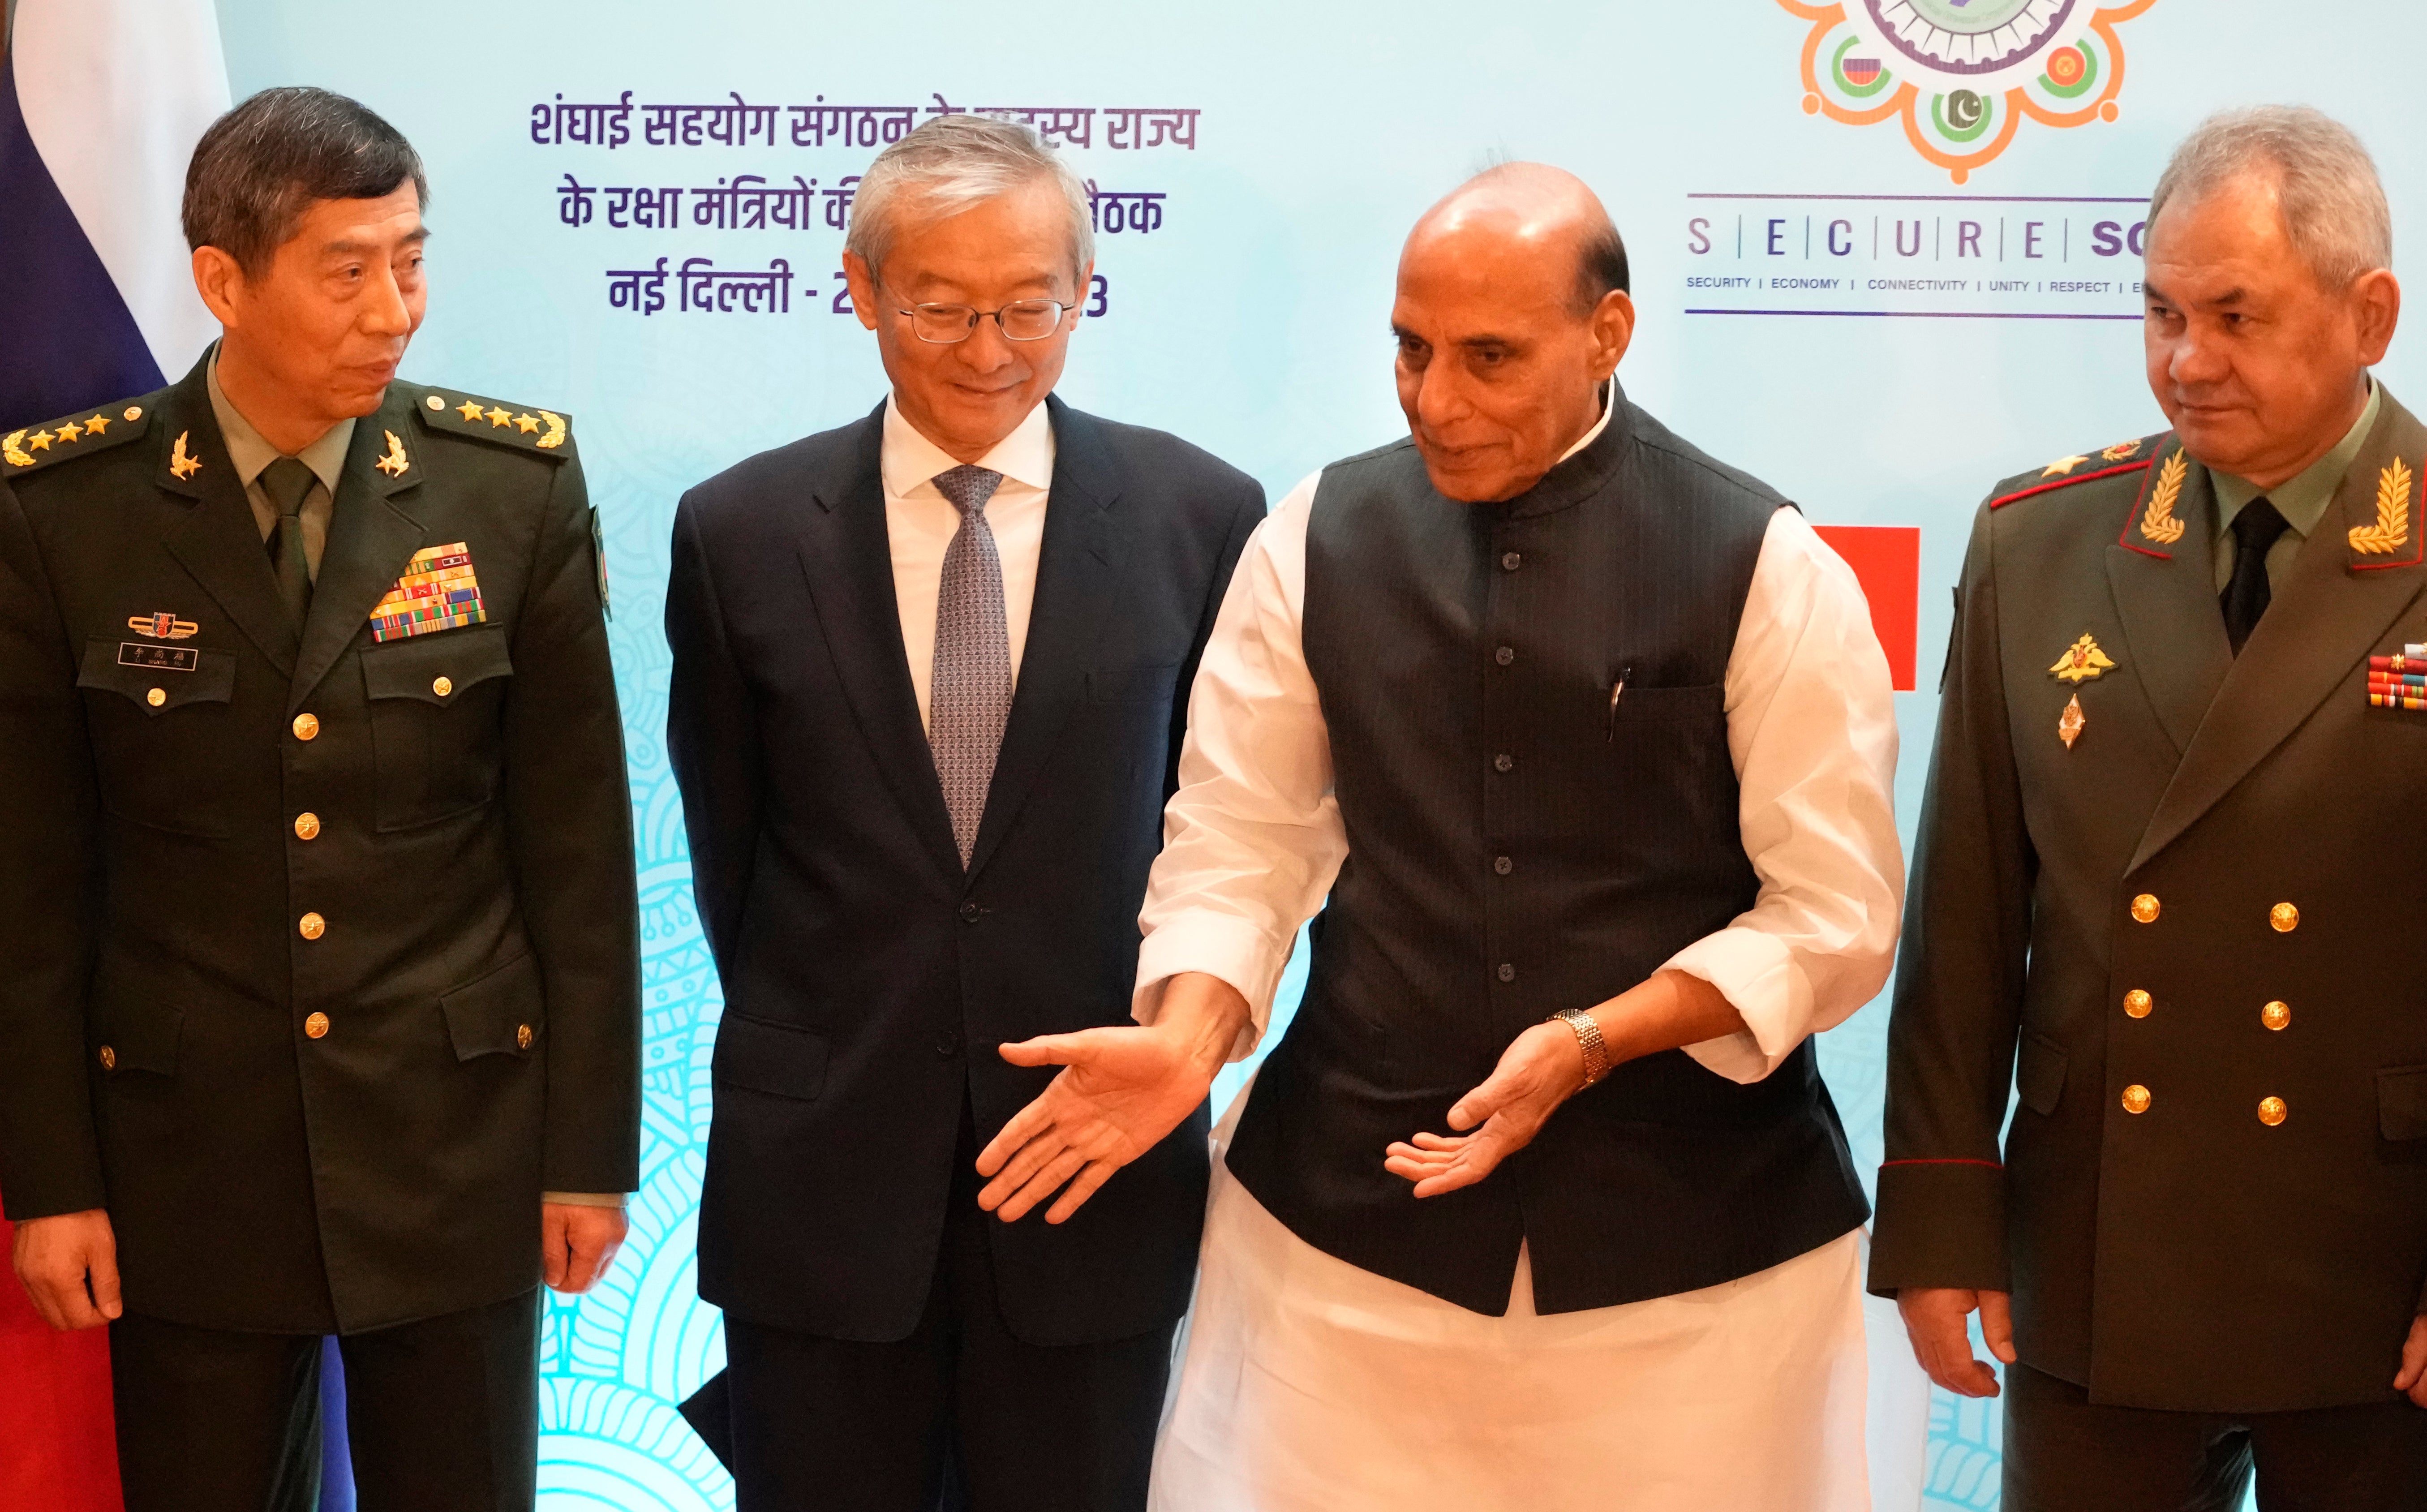 Indian defence minister Rajnath Singh (second from right) talks with his Russian counterparts Sergei Shoigu (right), Chinese General Li Shangfu (left) and the Shanghai Cooperation Organization’s secretary-general Zhang Ming